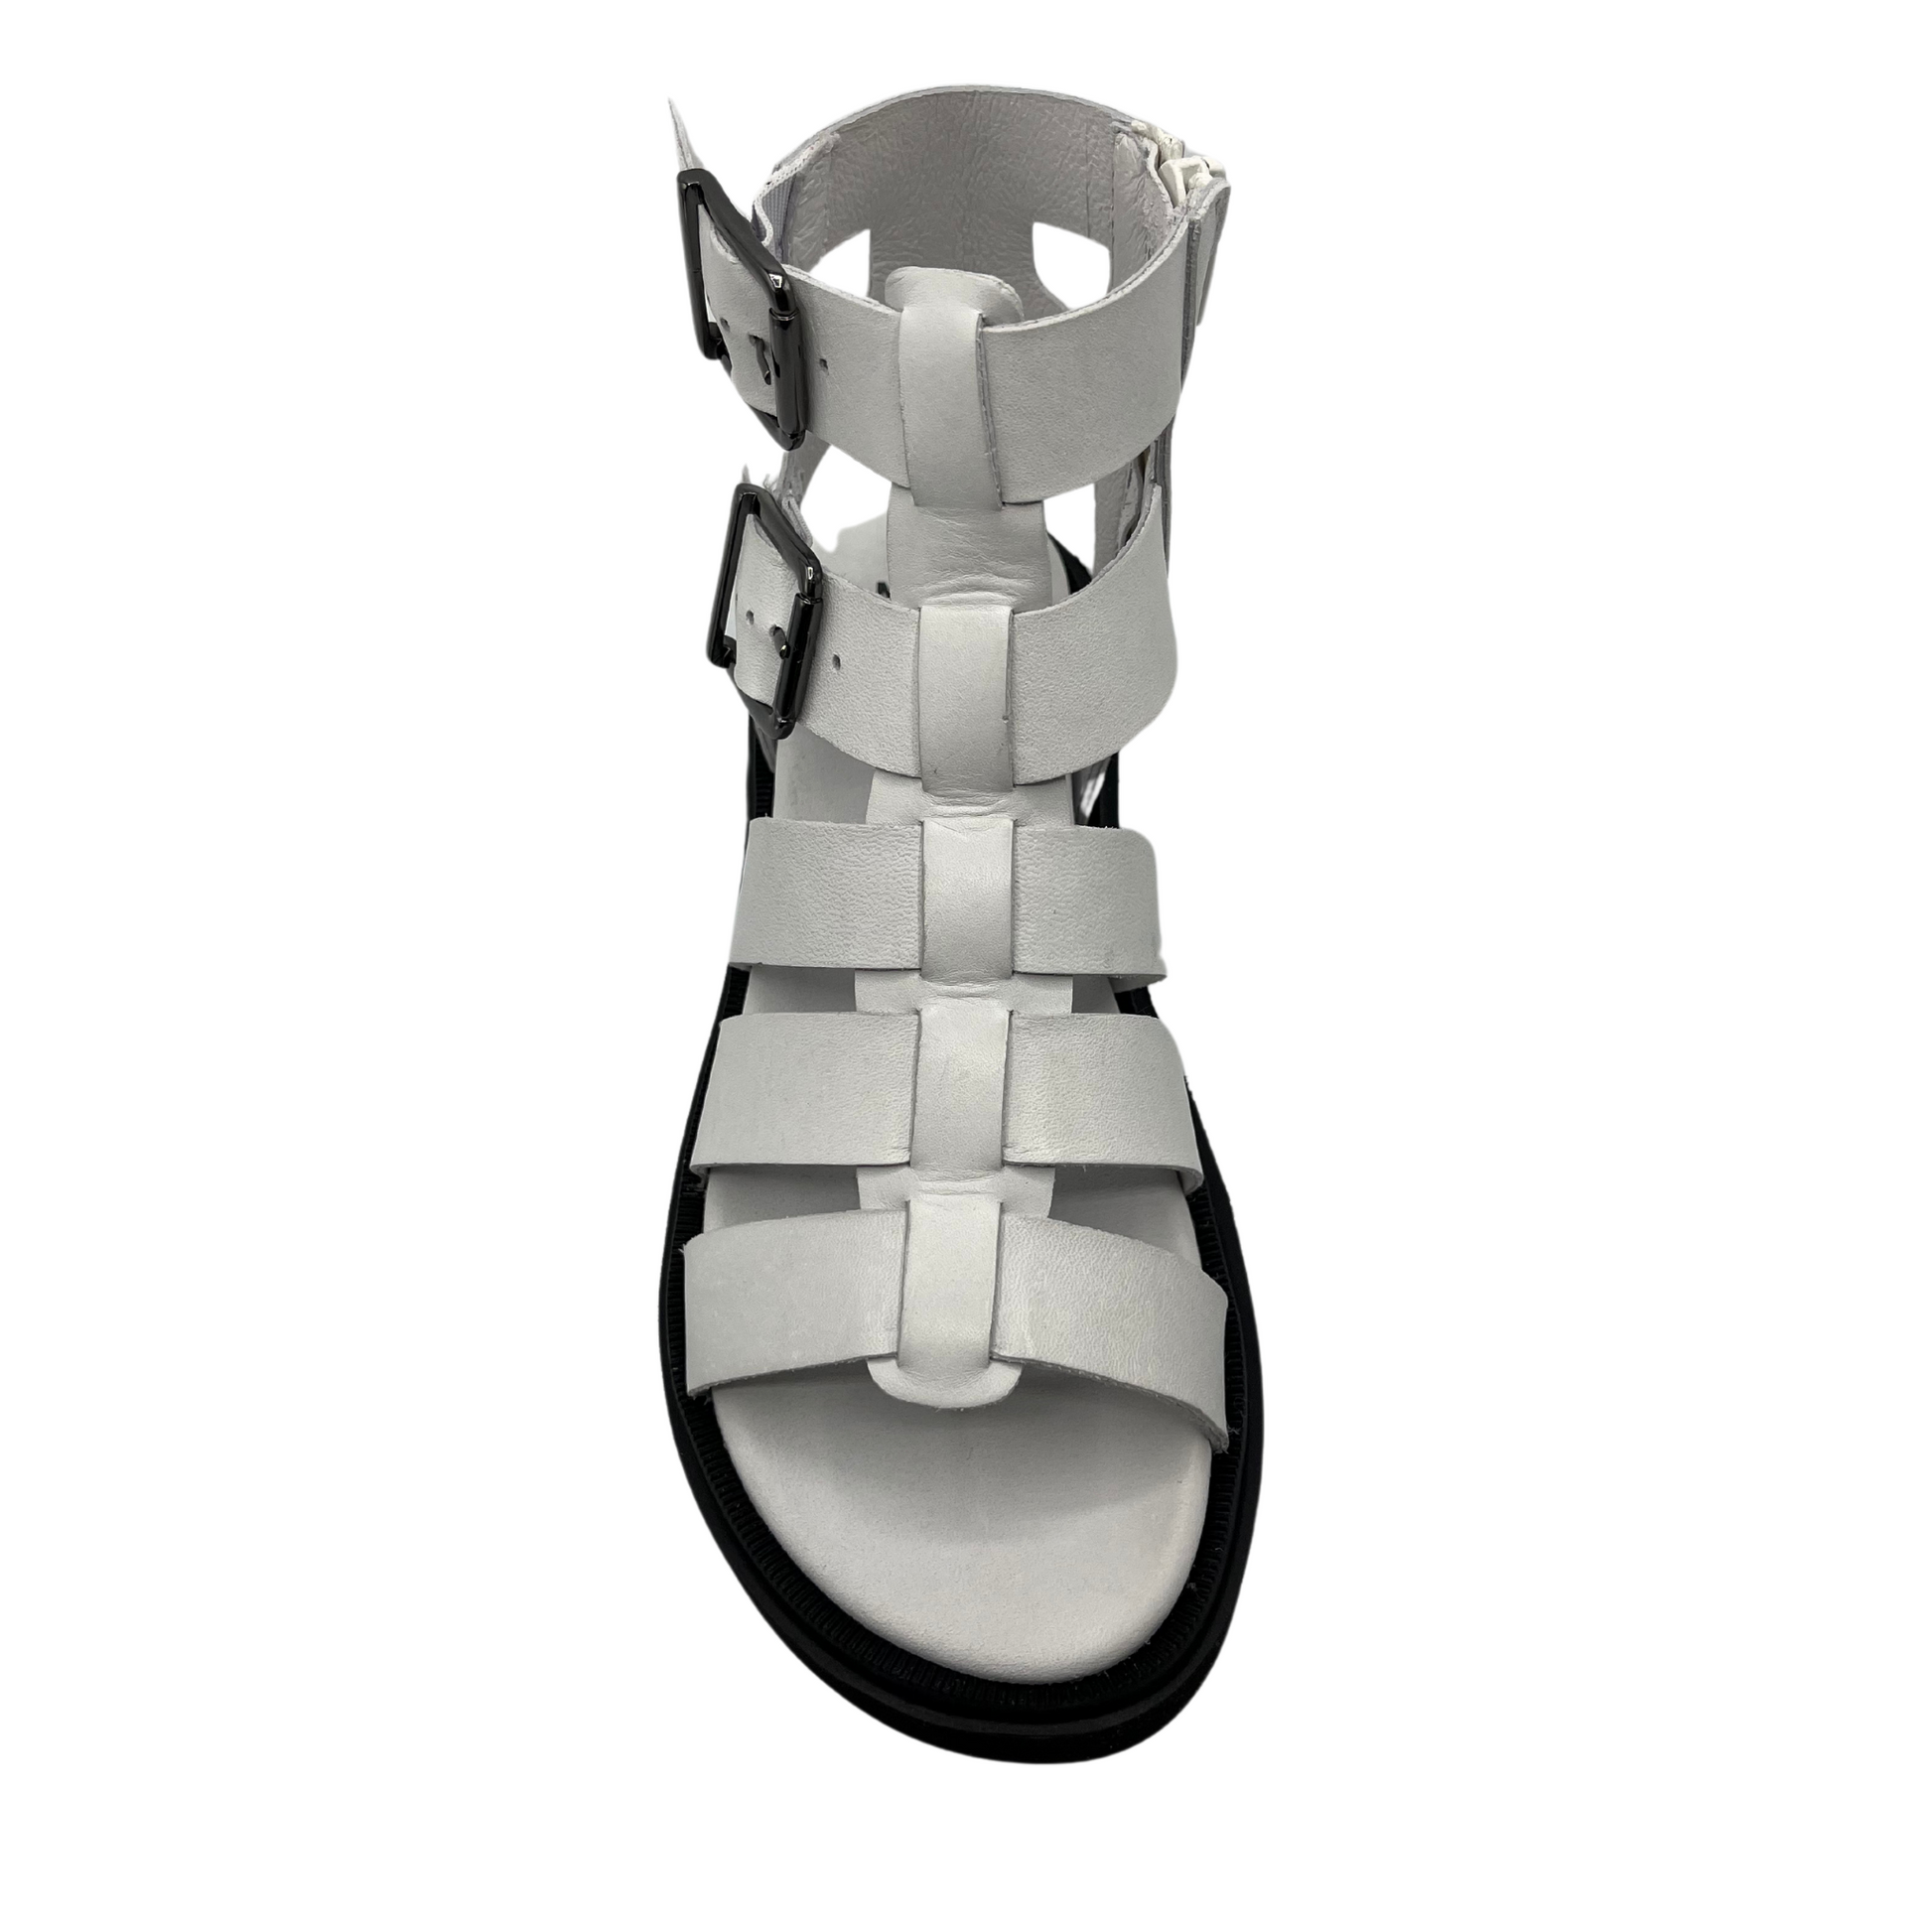 Top view of white leather gladiator sandal with black rubber outsole. Lined footbed and double buckle straps